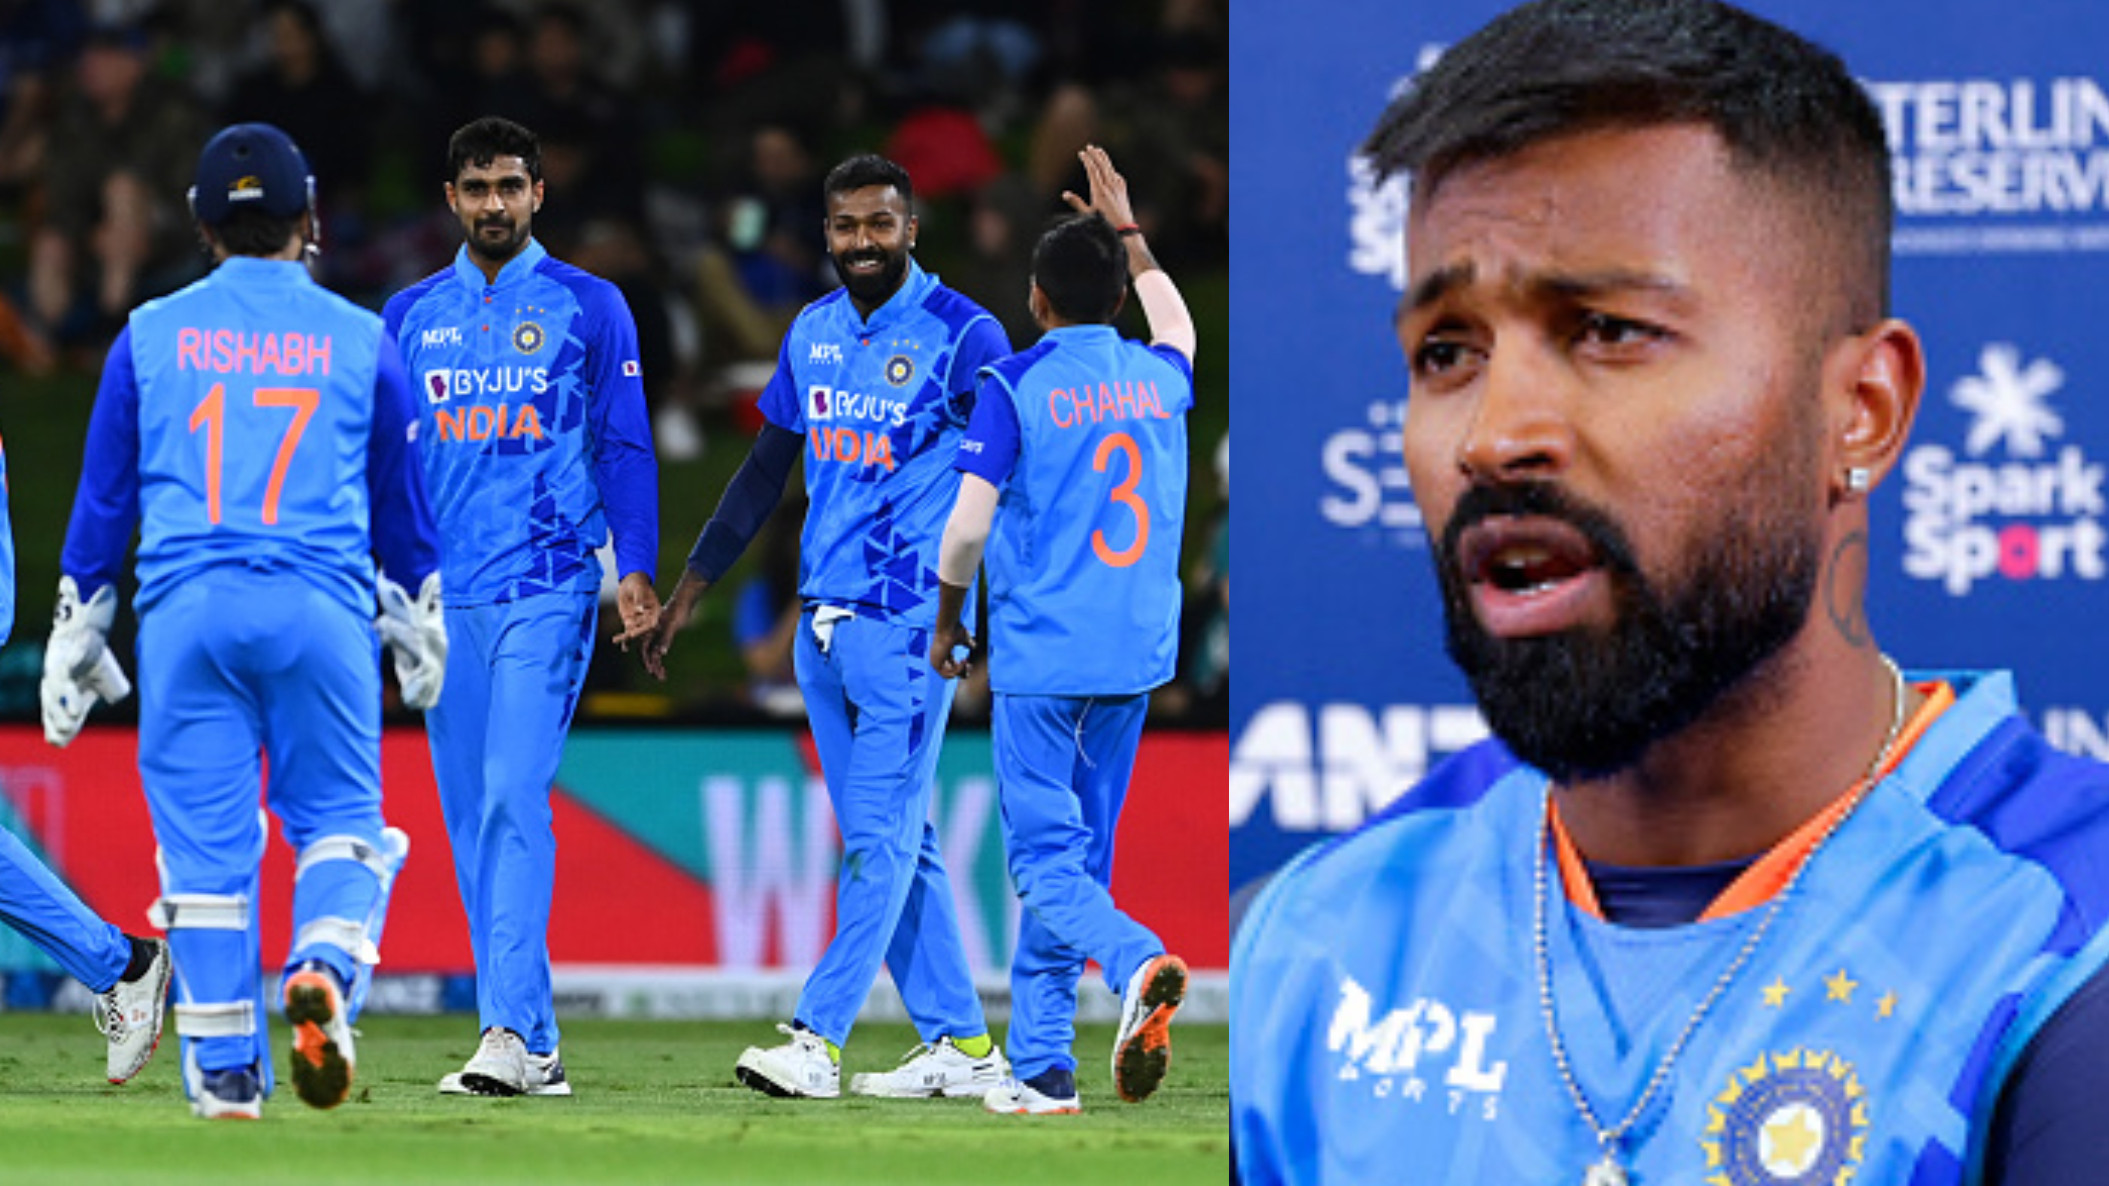 NZ v IND 2022: “Absolutely can't get better than this”- India captain Hardik Pandya after win in 2nd T20I